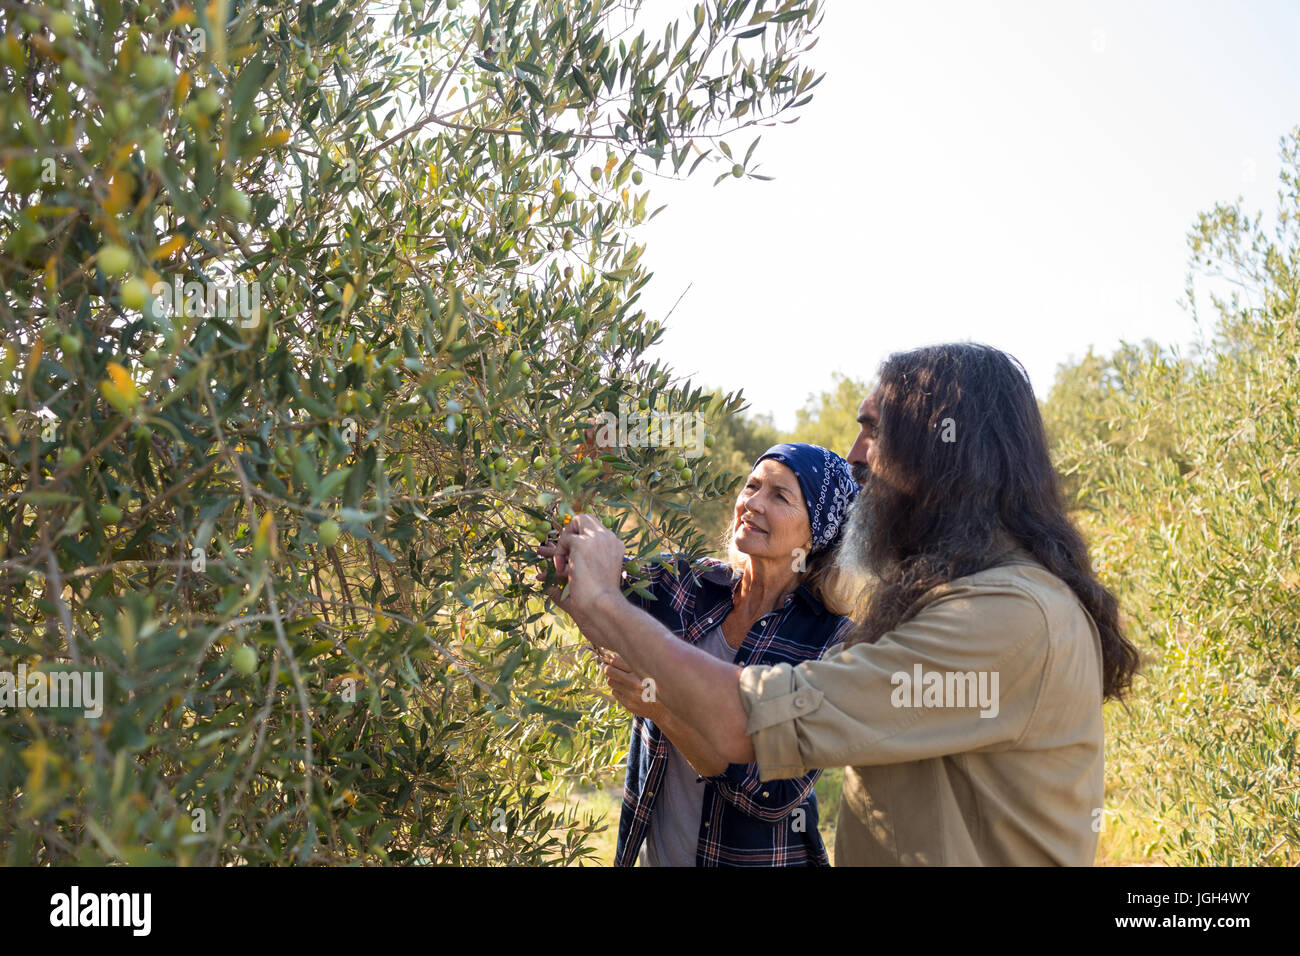 Couple interacting while harvesting olives in farm Stock Photo